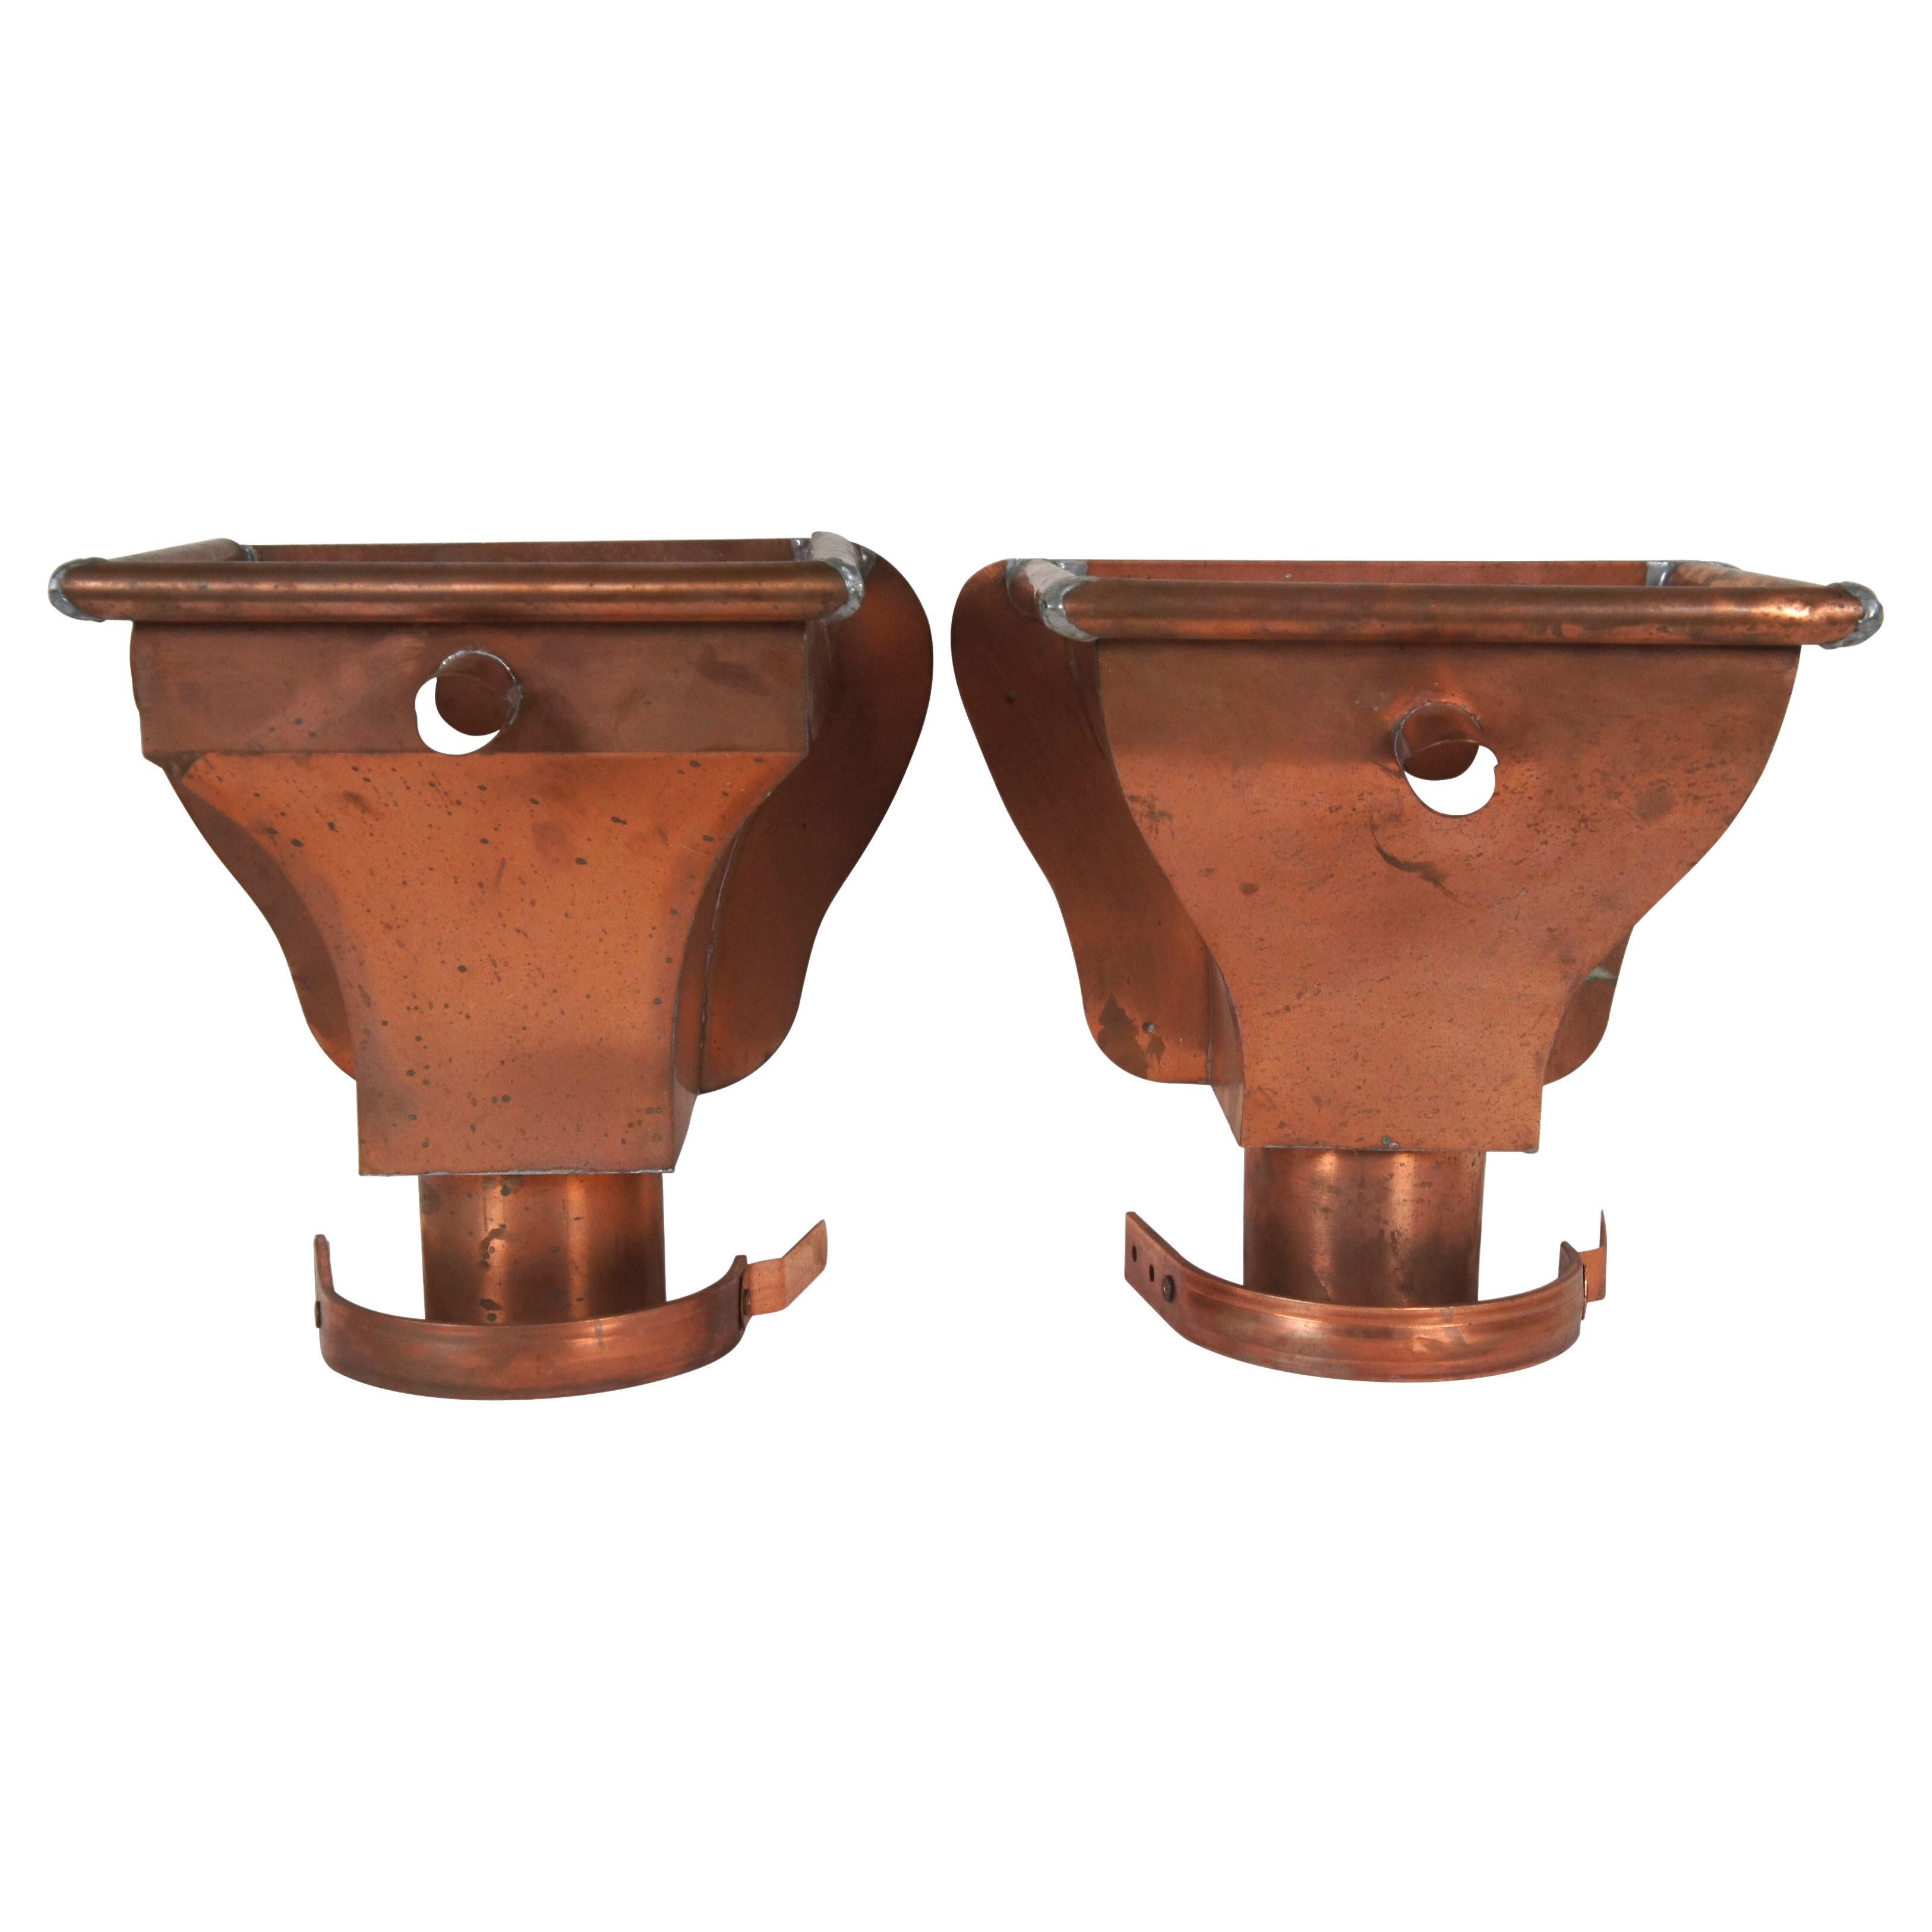 2 Vintage Copper Gutter Leader Box Heads w/ Overflow Pipe Outlet Downspout 13" For Sale